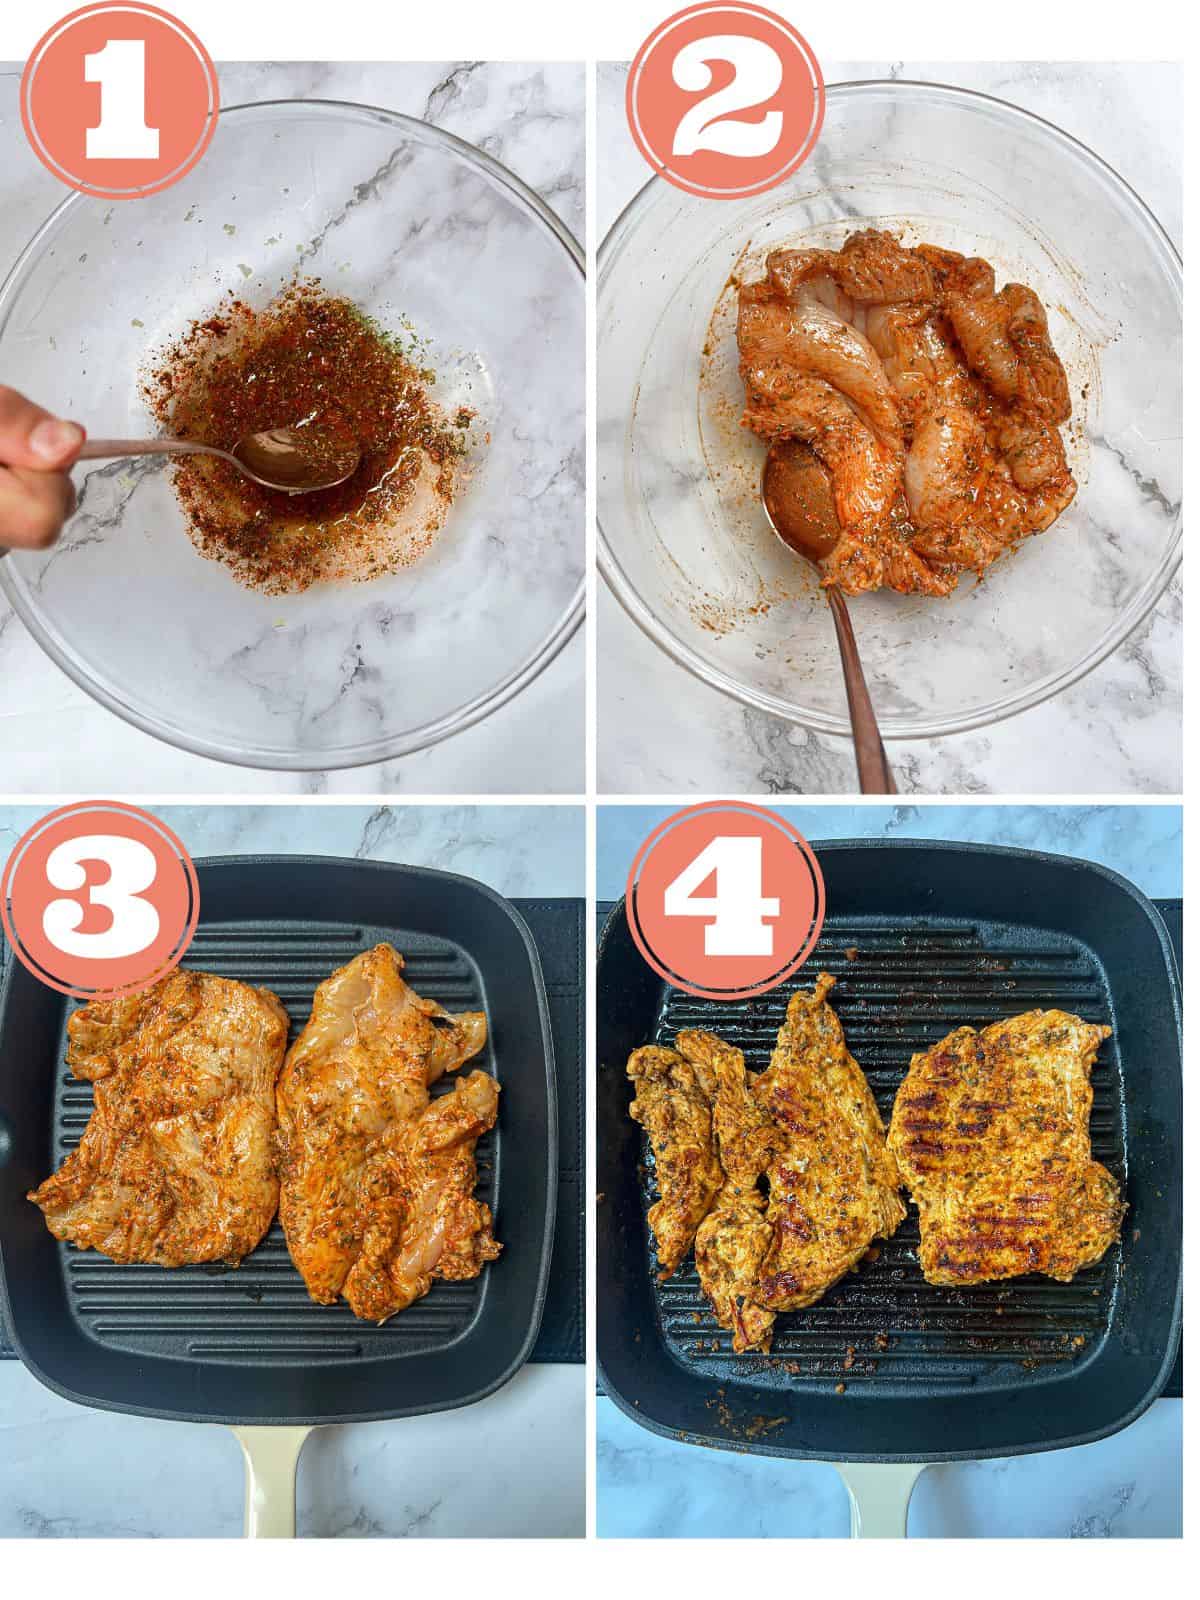 Showing the steps on how to make peri peri chicken butterfly.